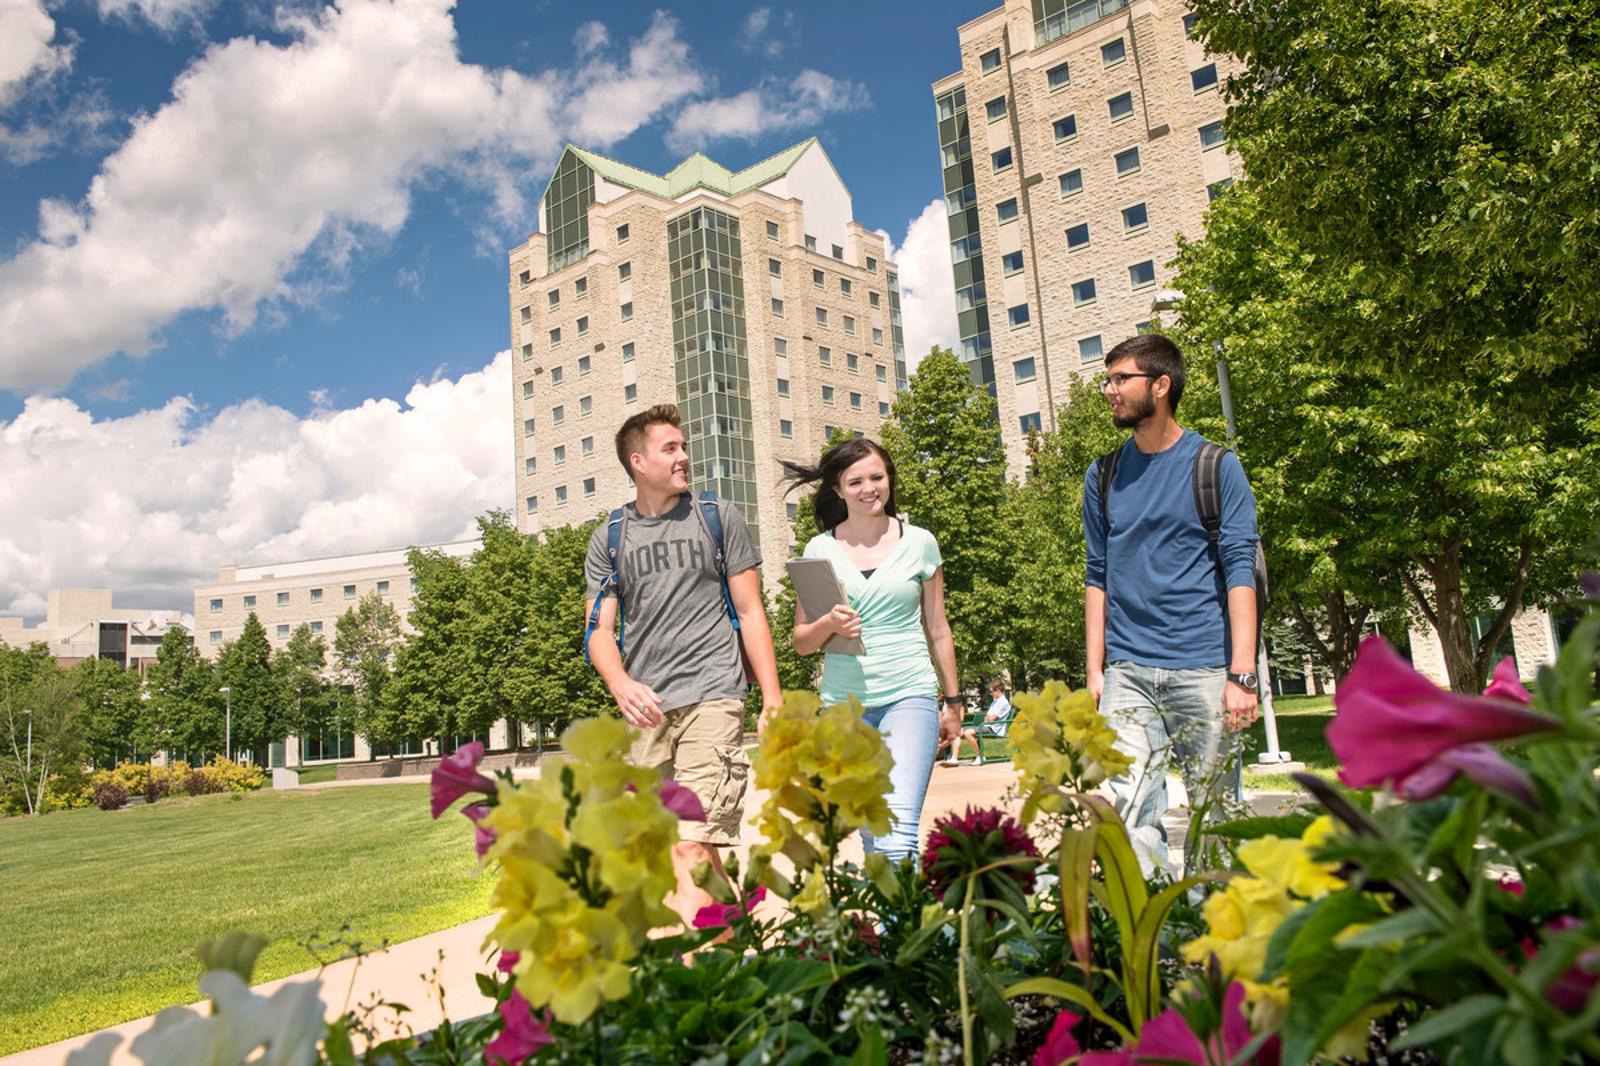 three students walking on campus with residence buildings in background